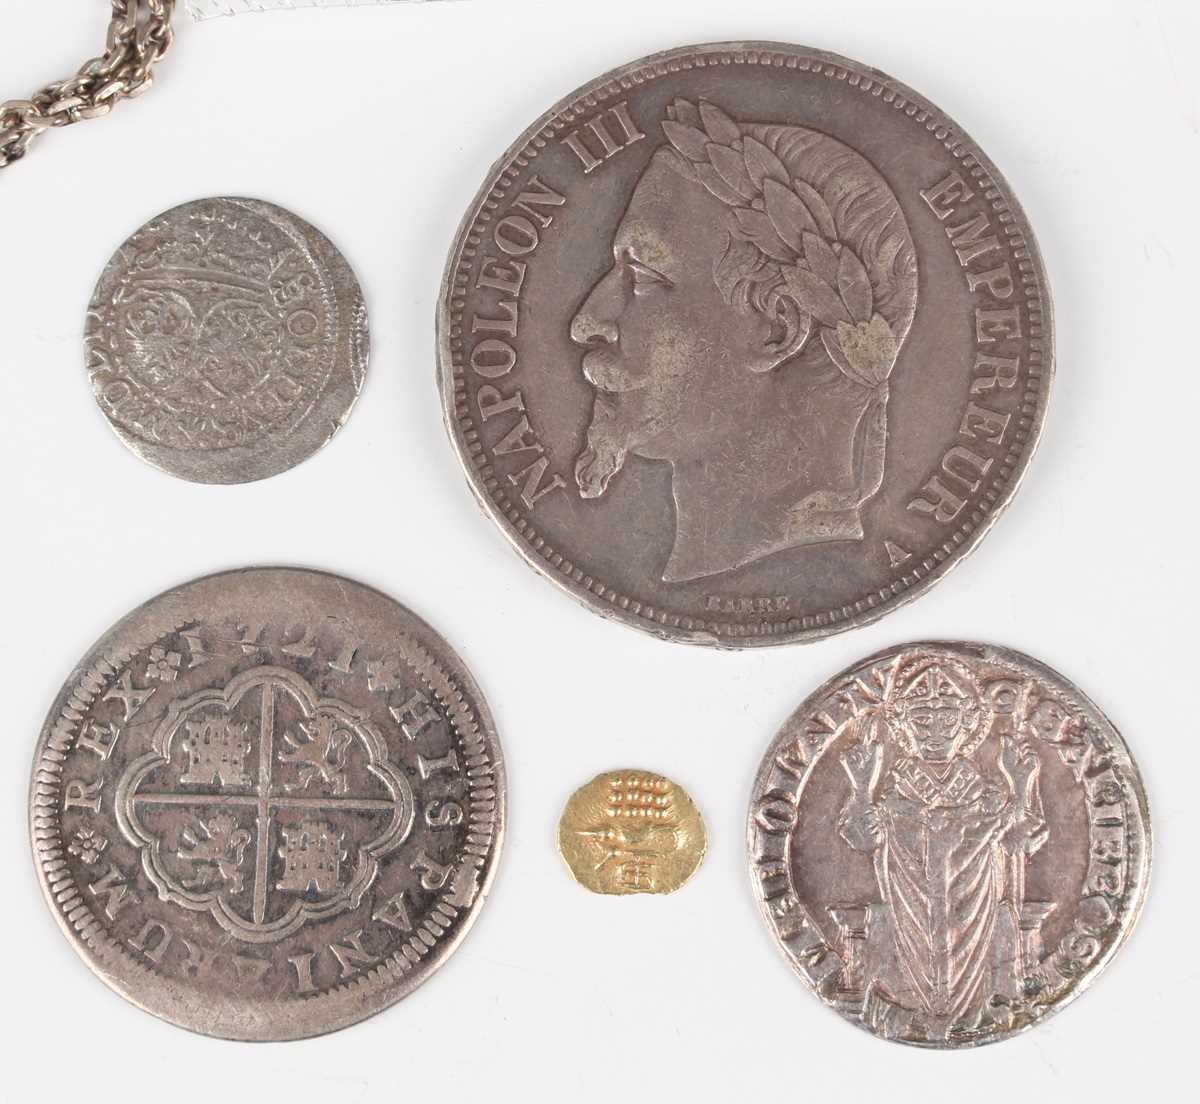 An India gold fanam, probably 18th century, together with a group of European and world coinage, - Image 2 of 5